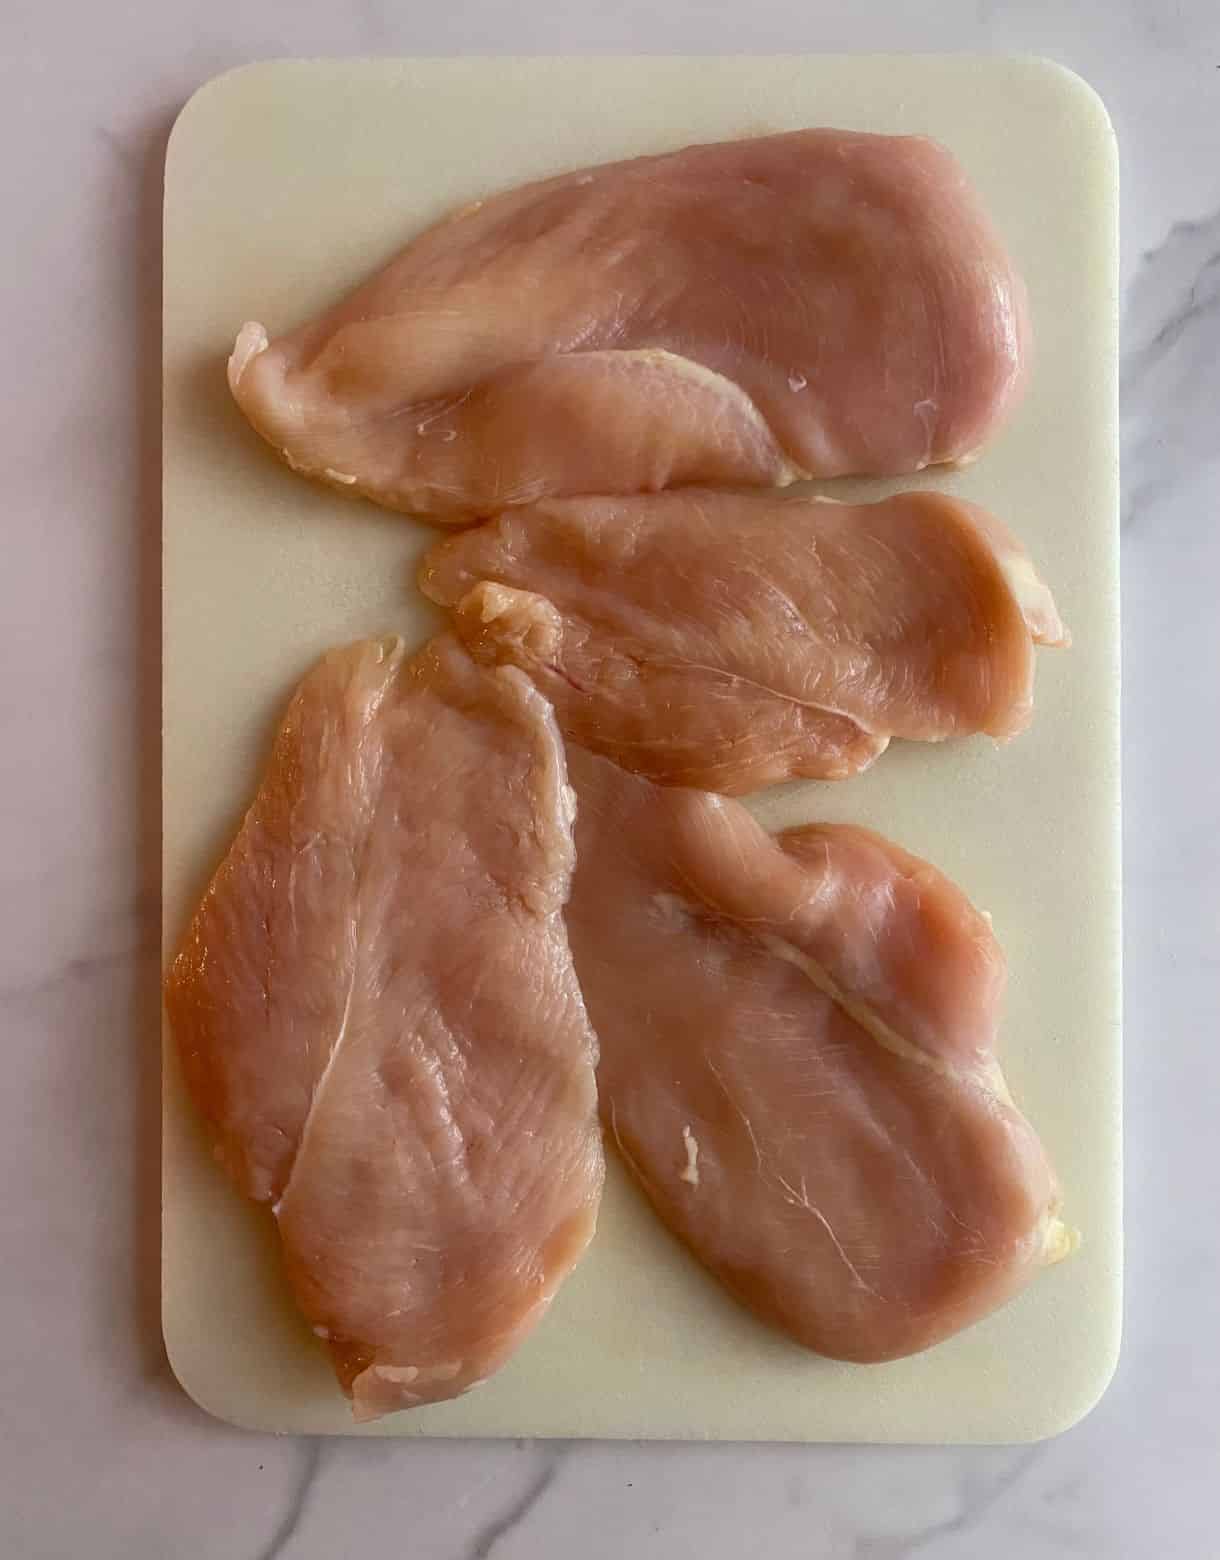 A cutting board with raw chicken breasts sliced in half lengthwise.